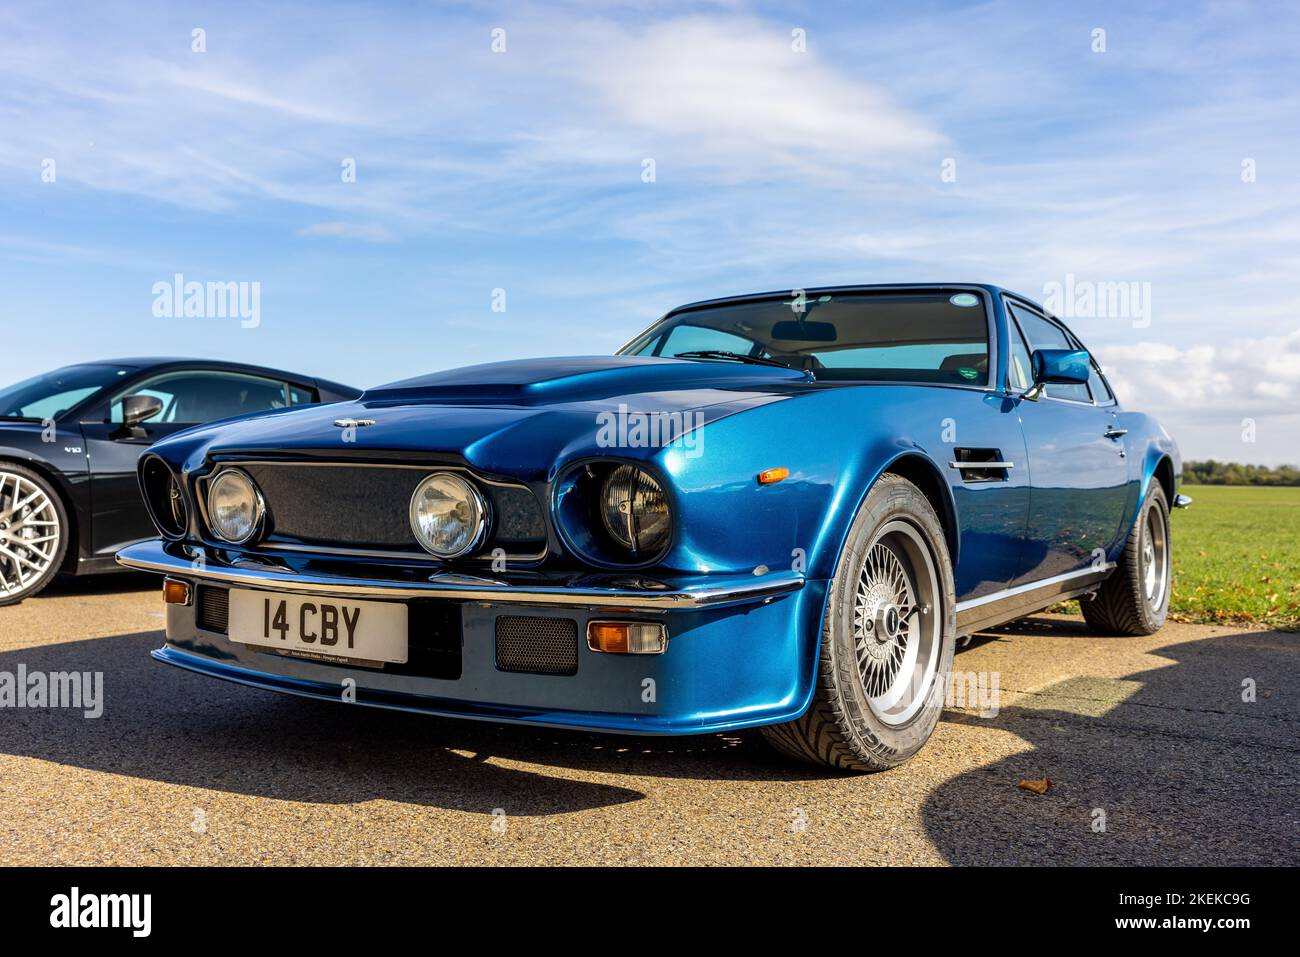 1984 Aston Martin V8 Vantage ‘14 CBY’ on display at the Poster Cars & Supercars Assembly at the Bicester Heritage Centre. Stock Photo